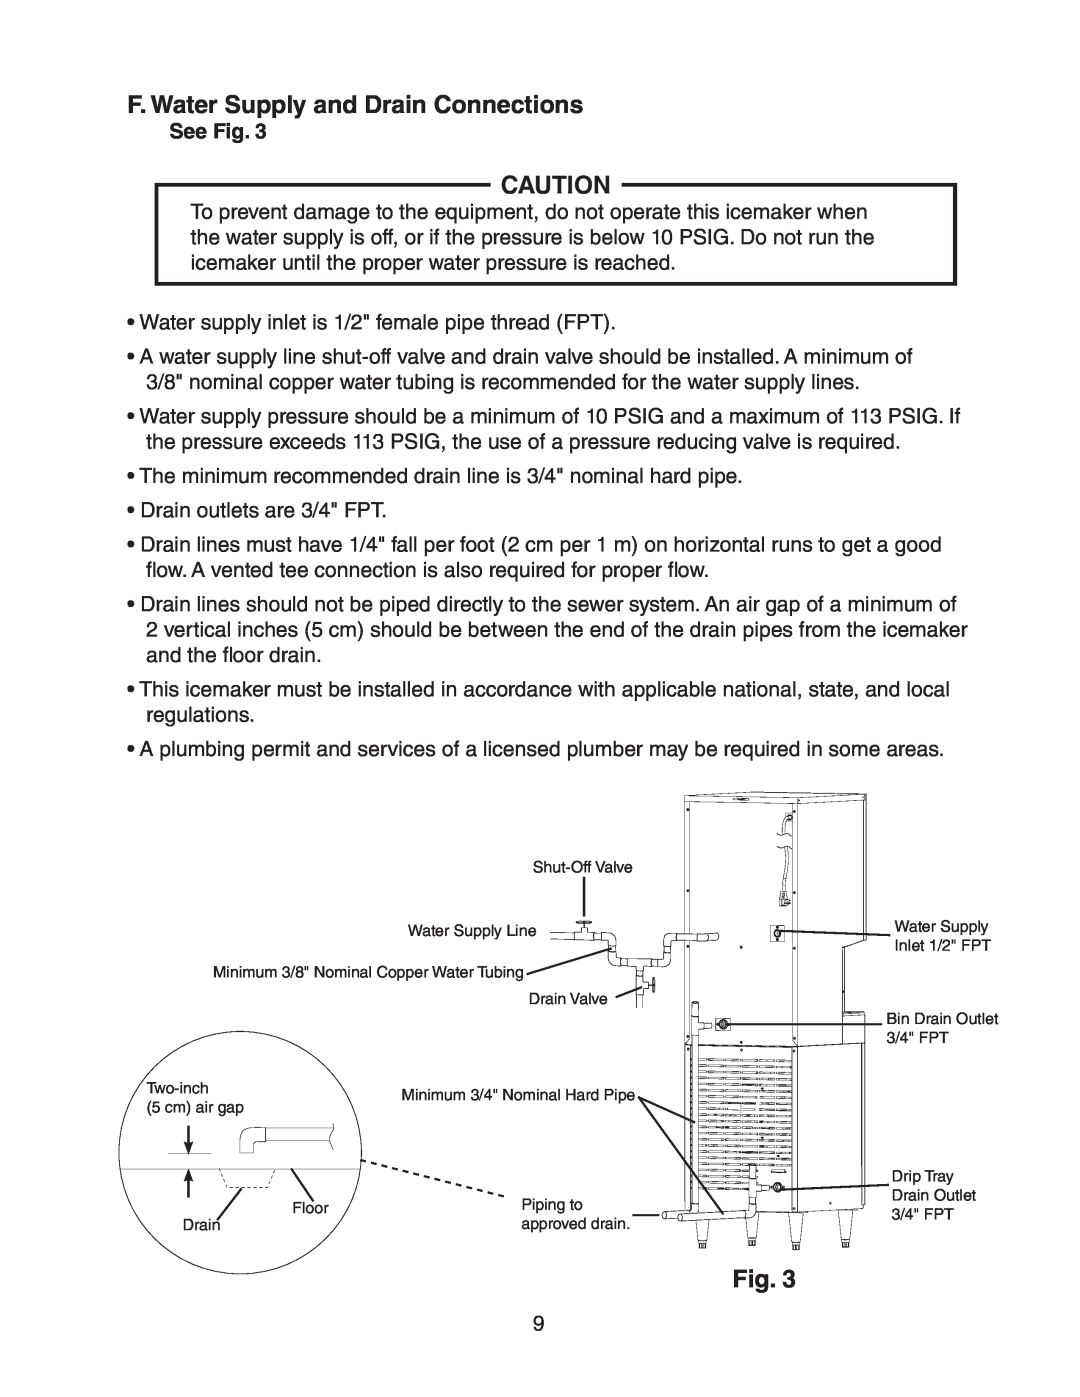 Hoshizaki DT-400BAH-OS instruction manual F. Water Supply and Drain Connections, See Fig 